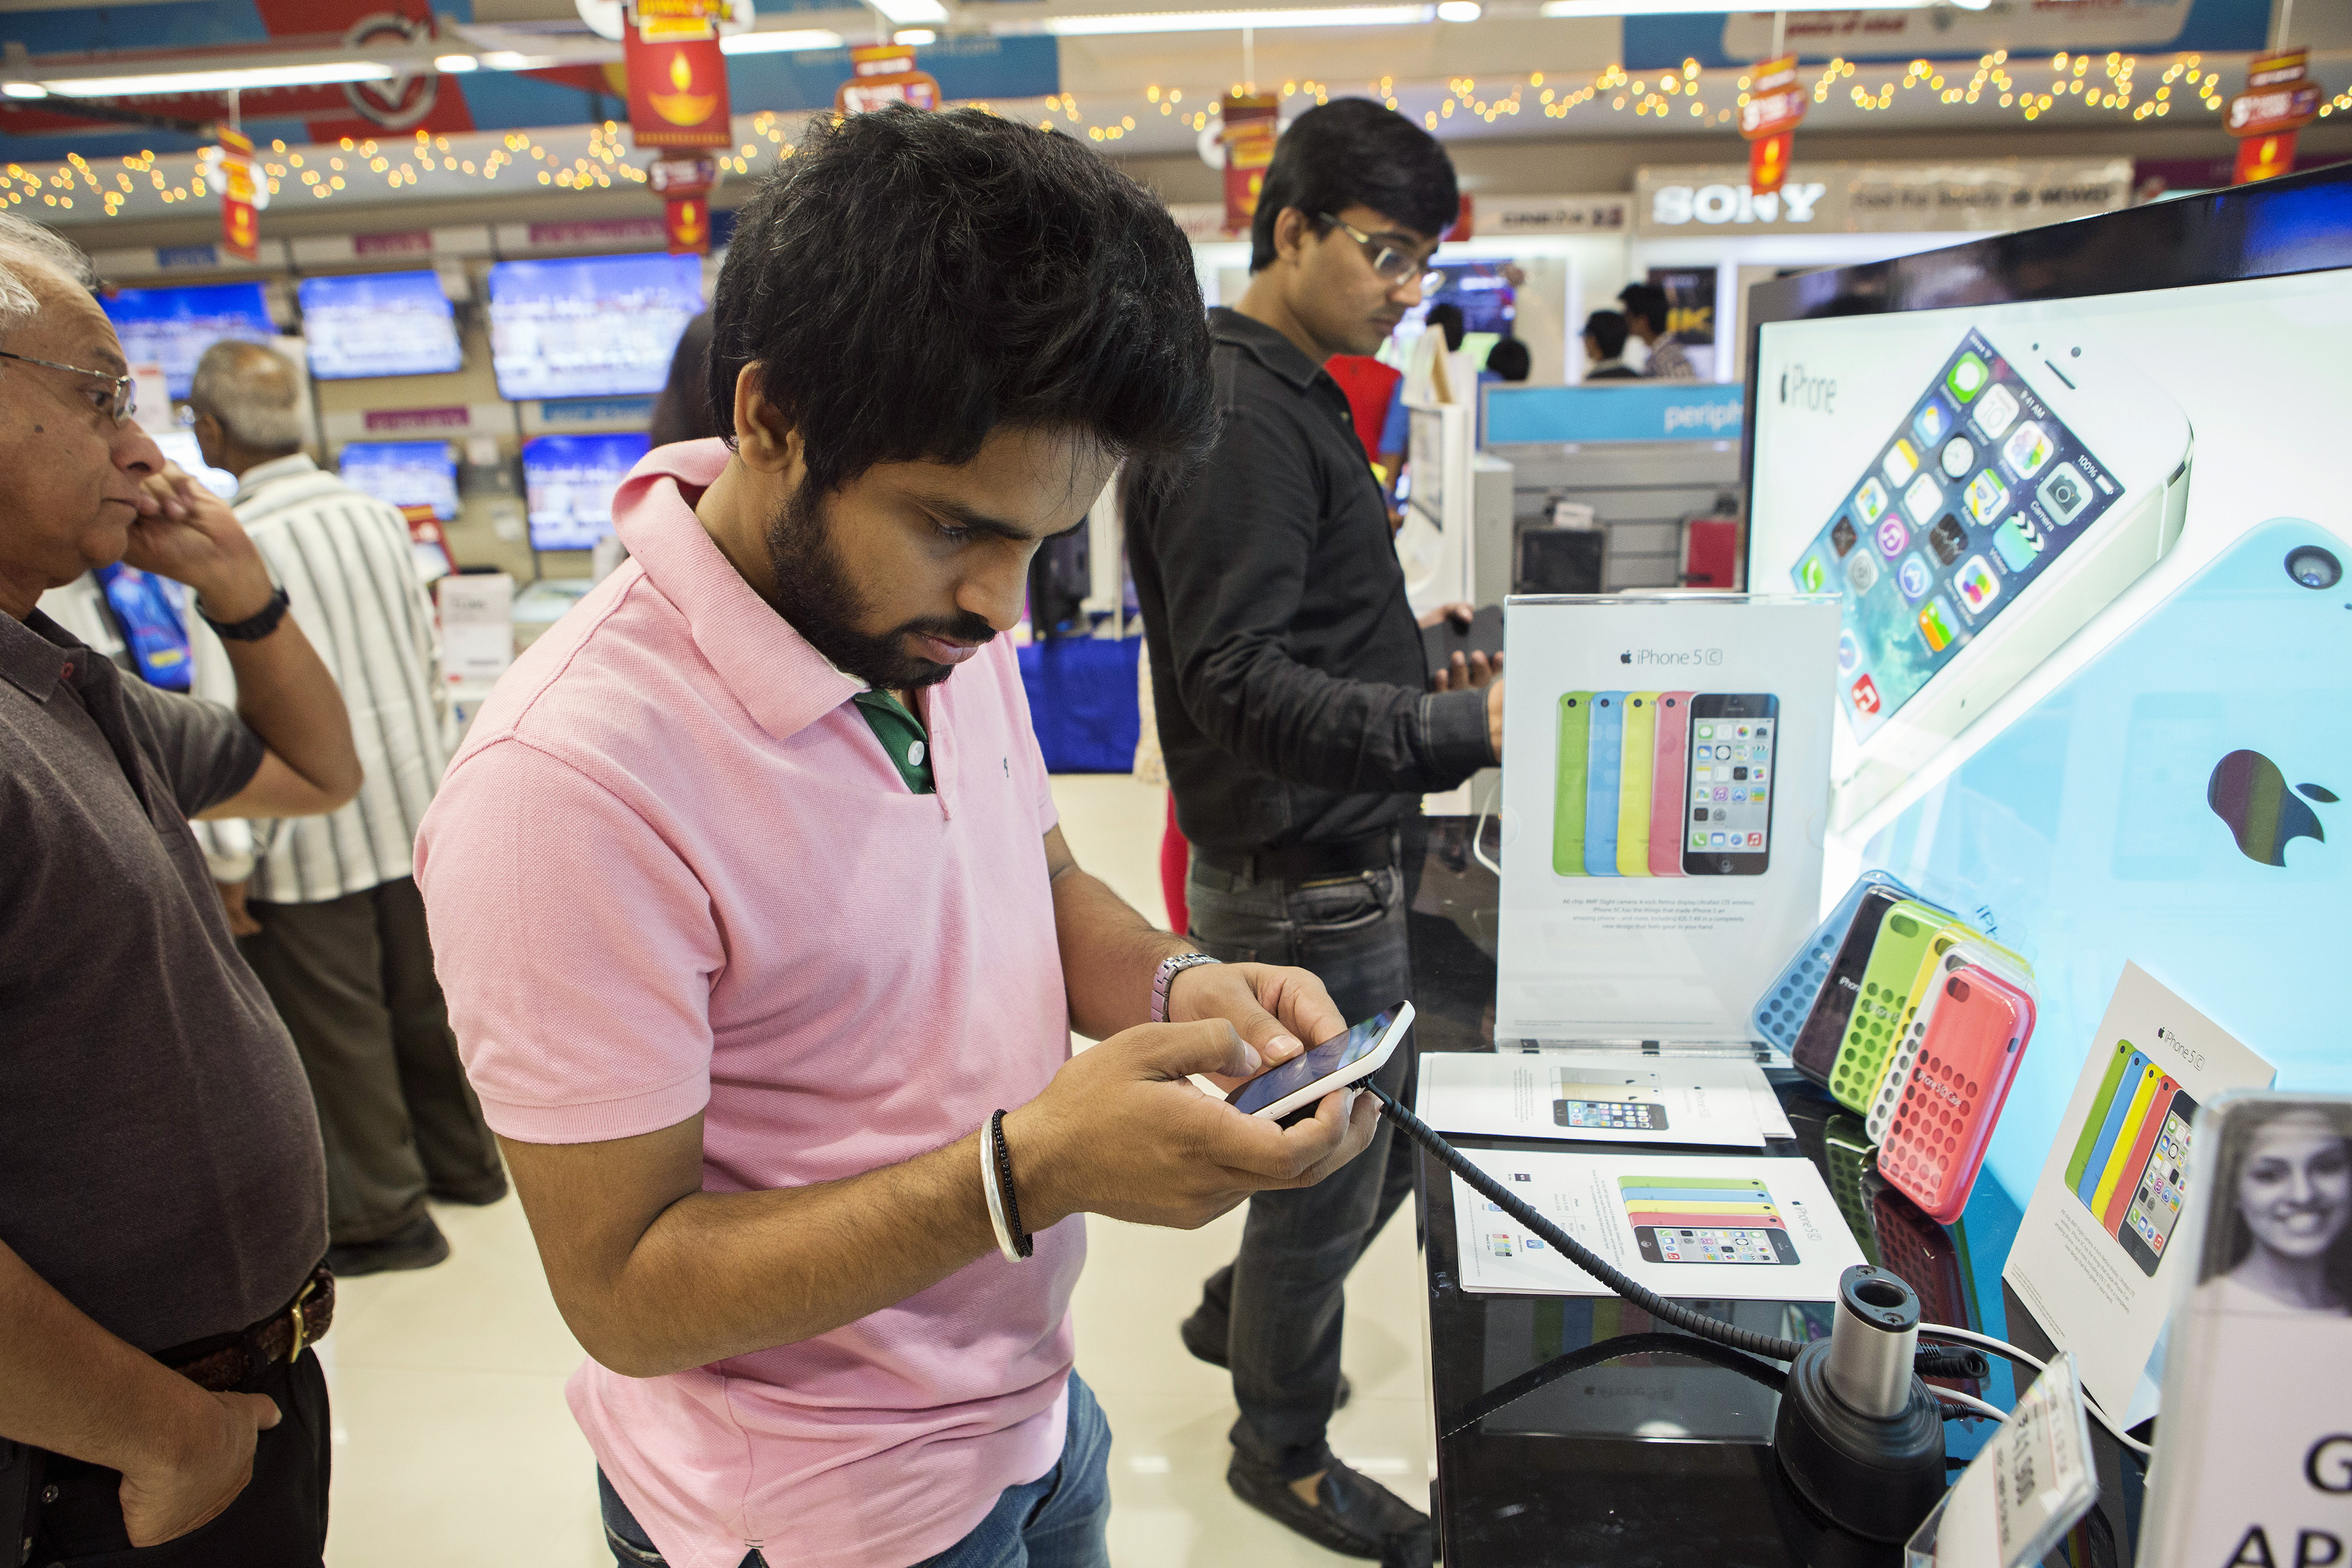 A customer tries out an Apple Inc. iPhone 5C at a Reliance Digital store, a subsidiary of Reliance Industries Ltd., in New Delhi, India, on Saturday, Nov. 2, 2013. (Bloomberg&mdash;Bloomberg via Getty Images)